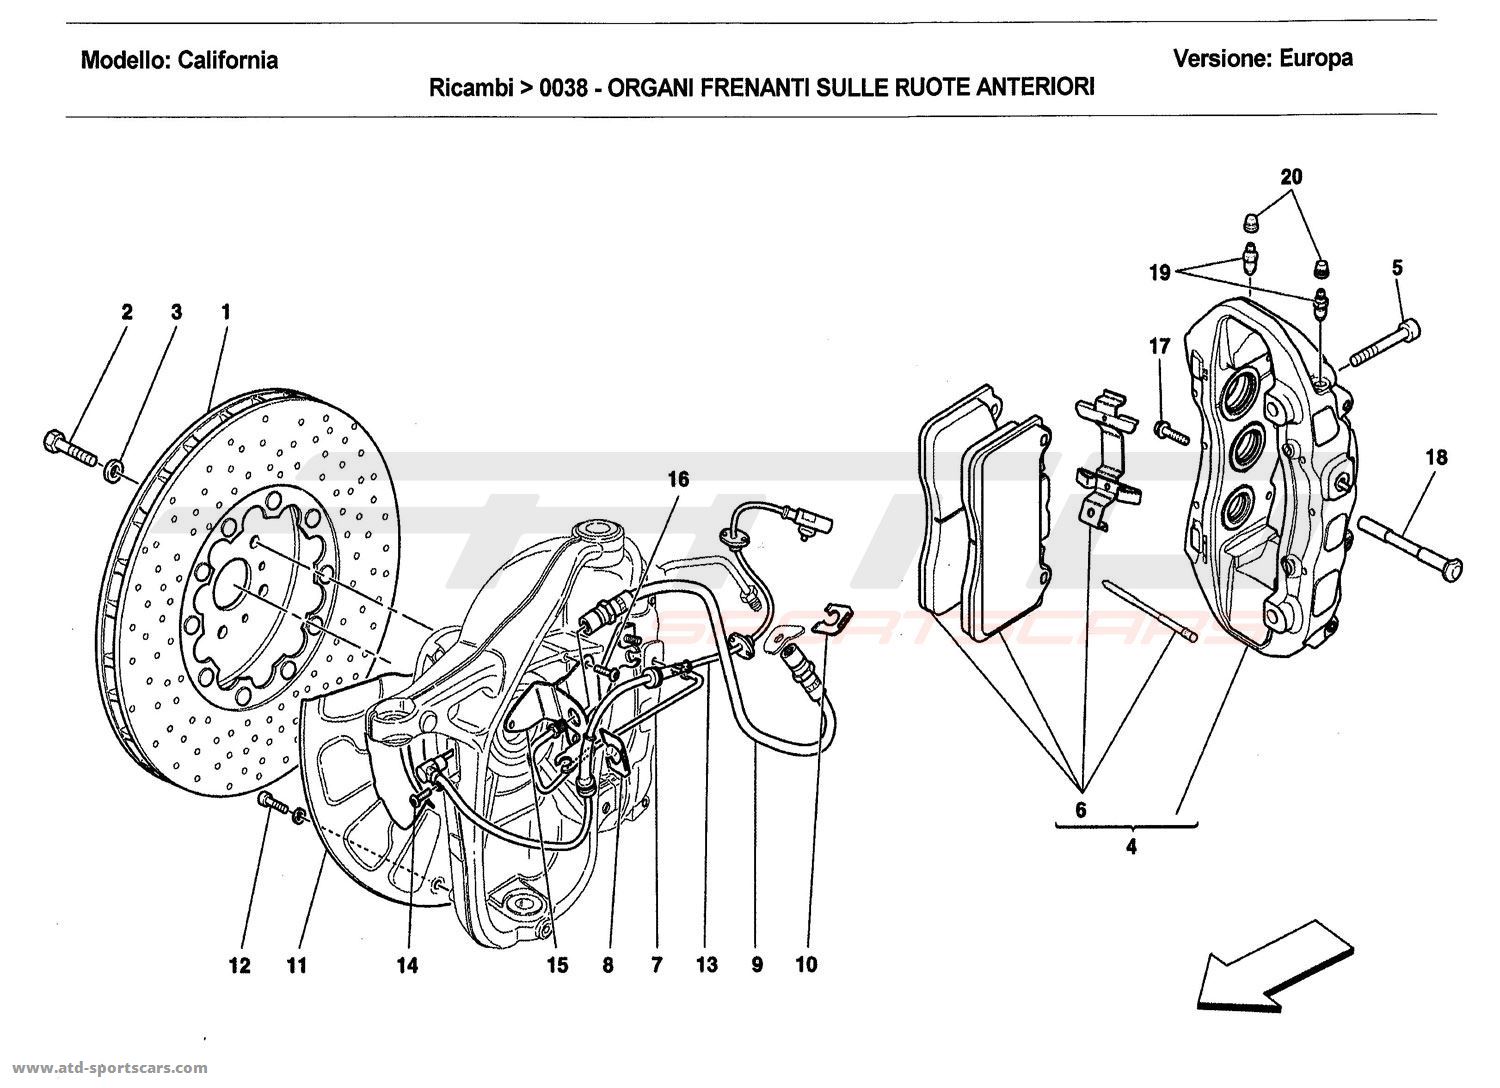 FRONT WHEEL BRAKE SYSTEM COMPONENTS